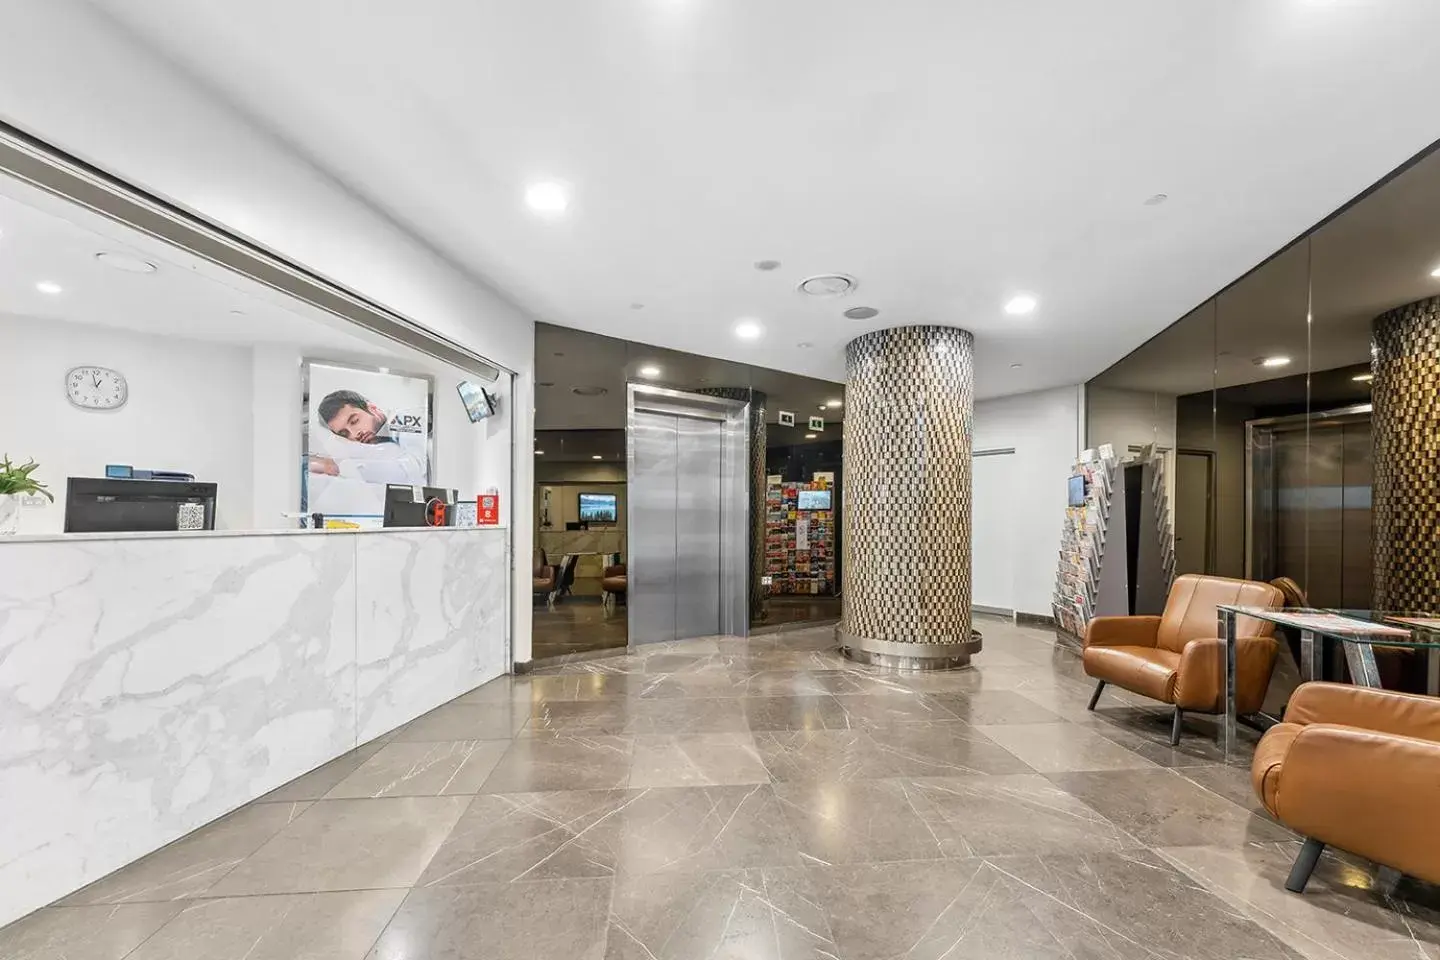 Property building, Lobby/Reception in APX World Square